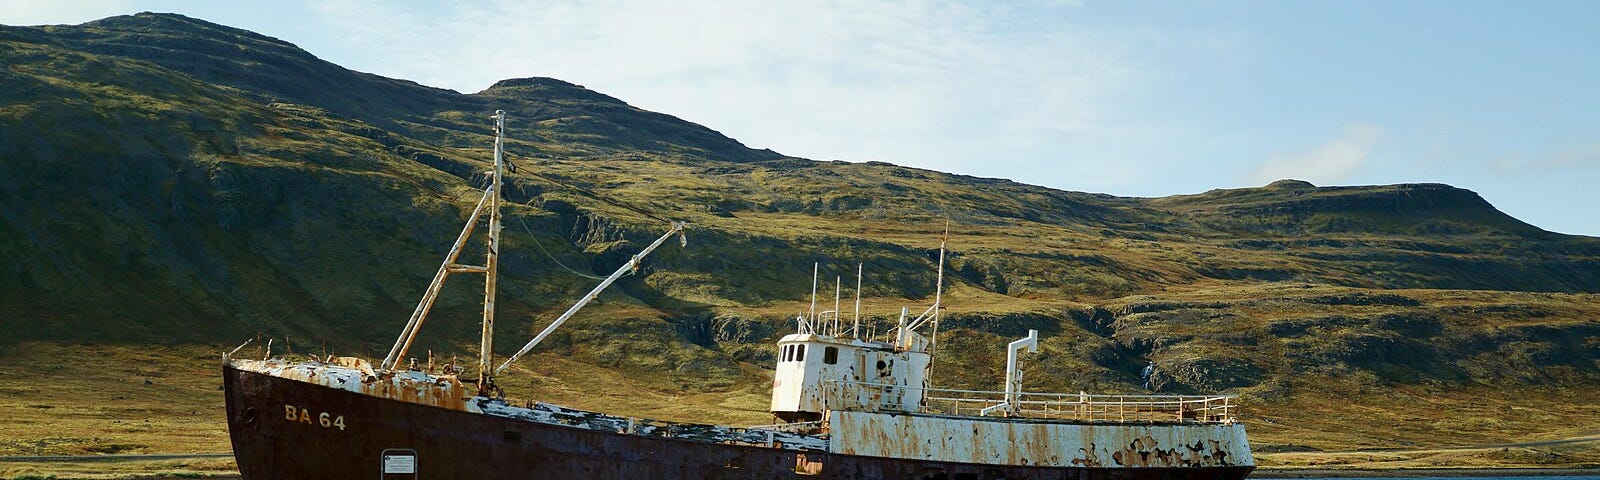 Beached boat in Iceland in front of rugged mountains.